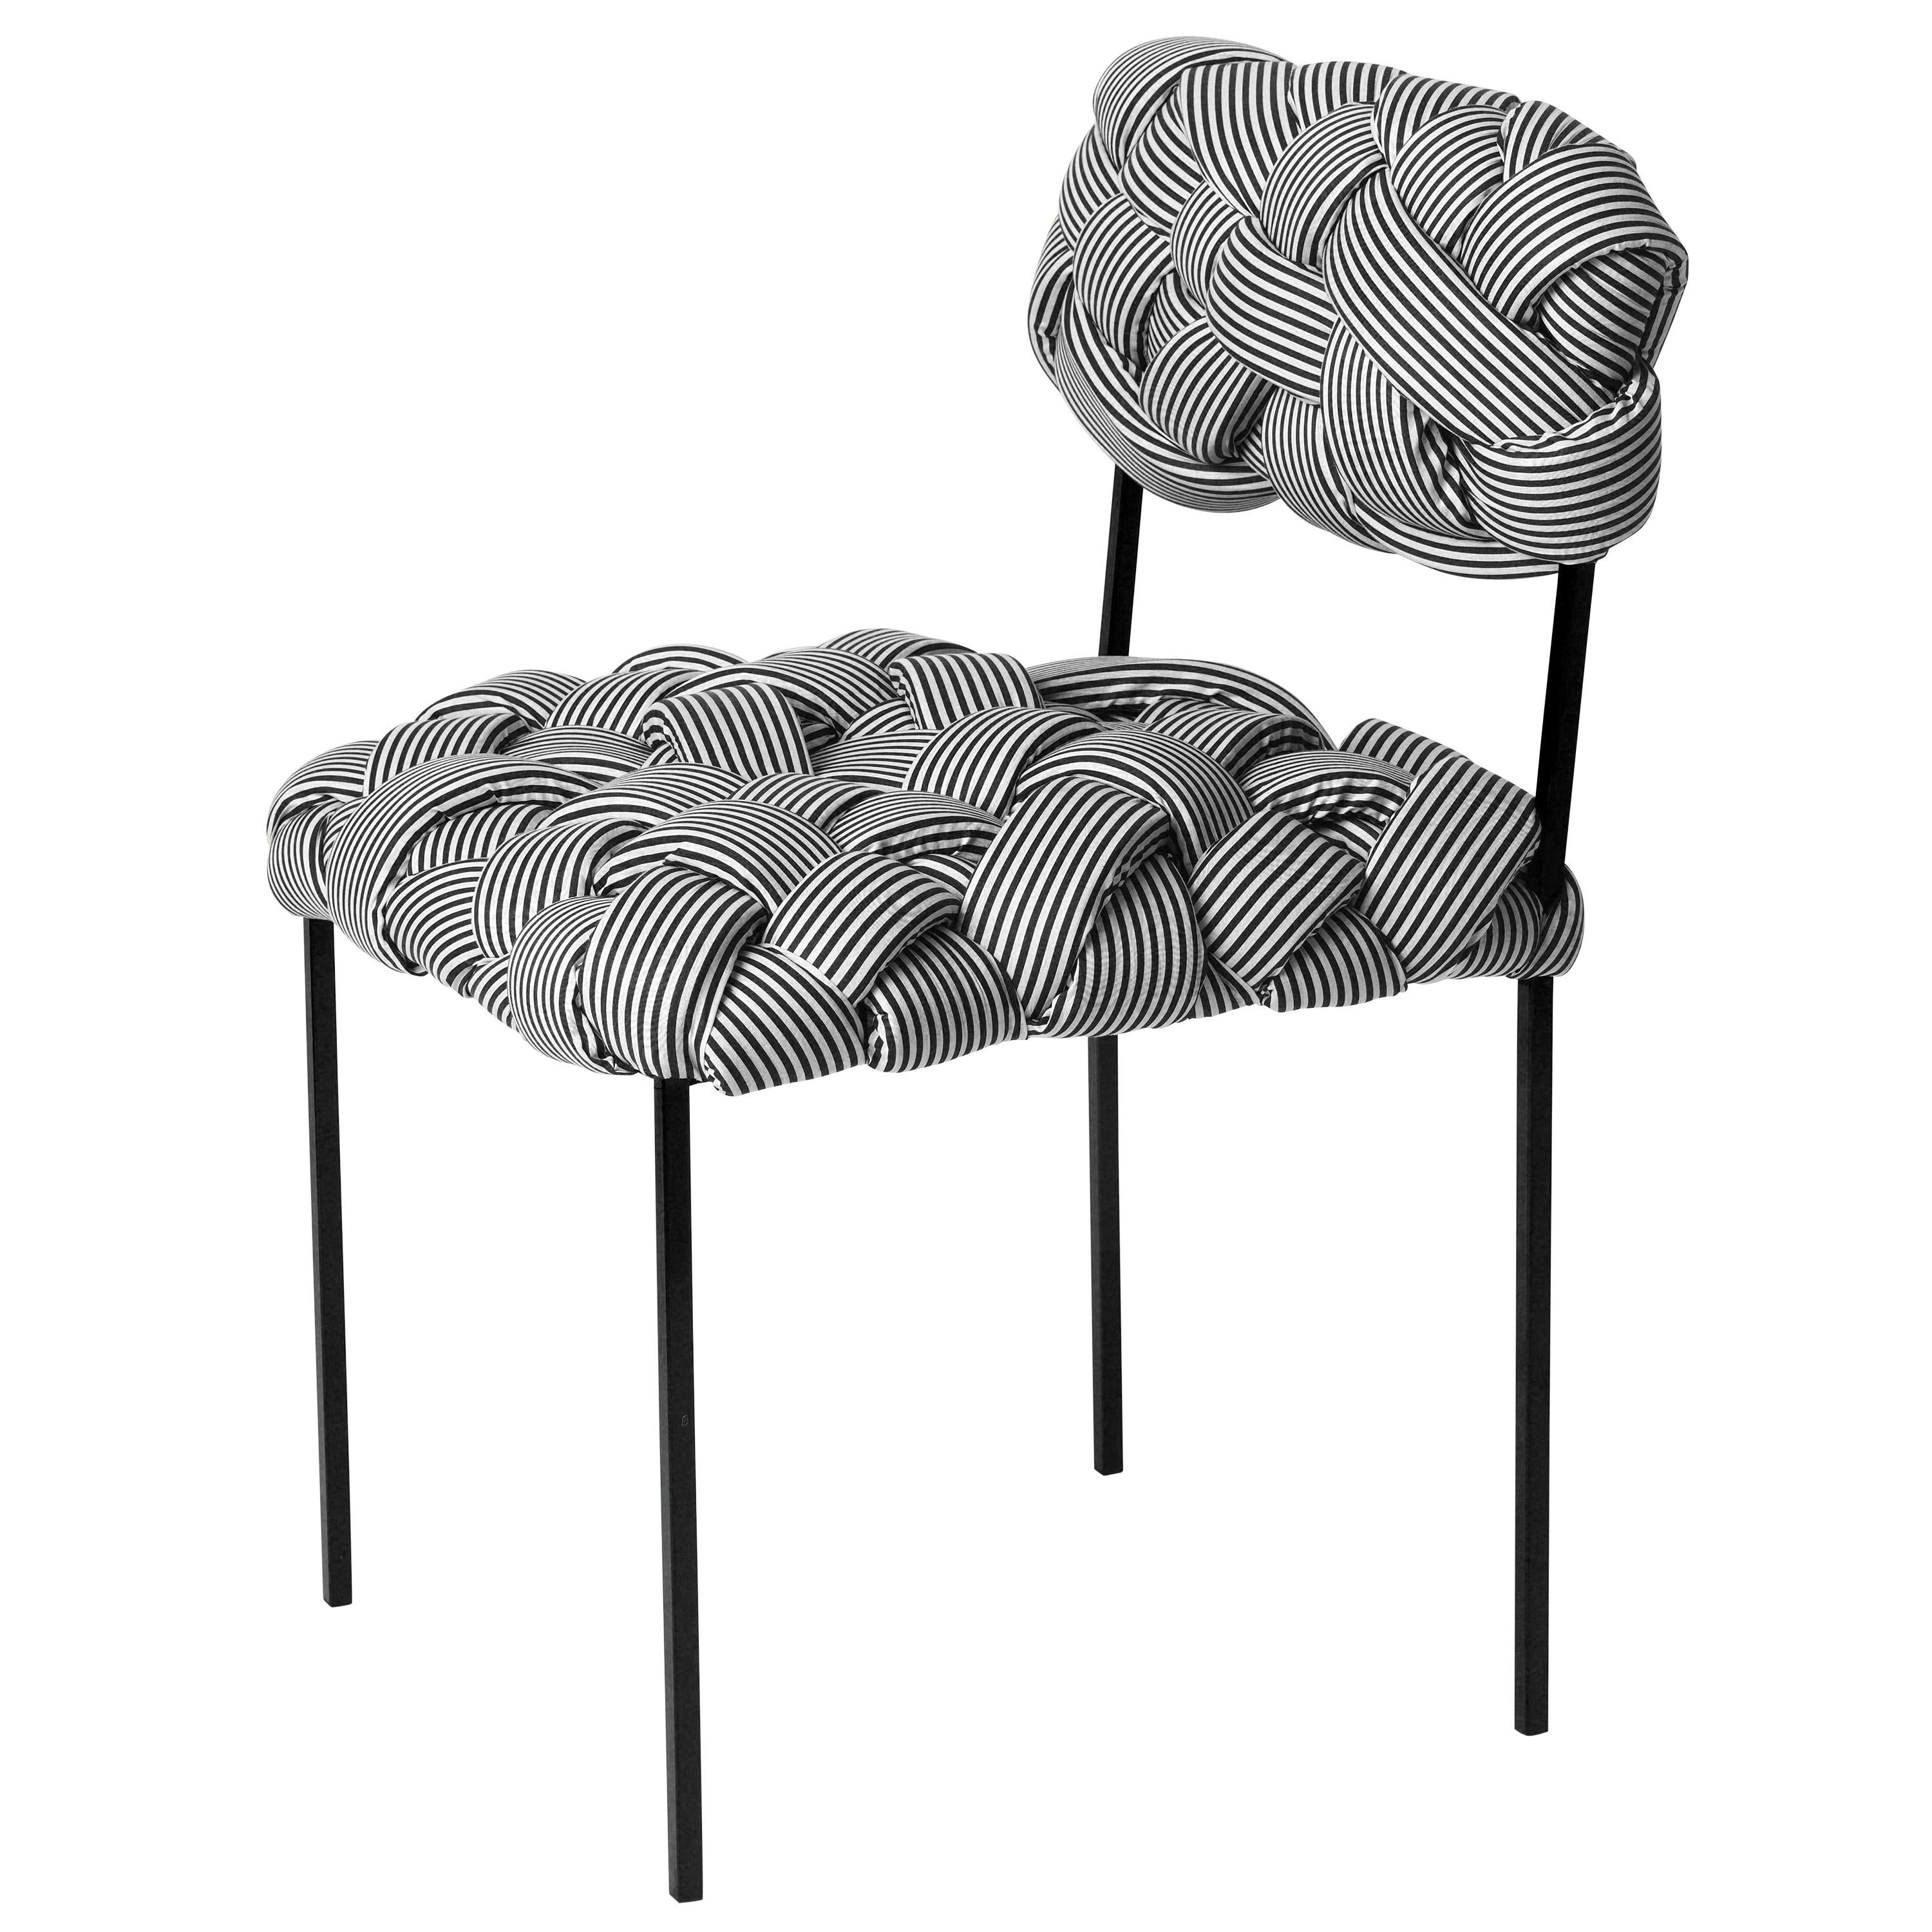 "Cloud" Contemporary Chair with Handwoven B&W Upholstery